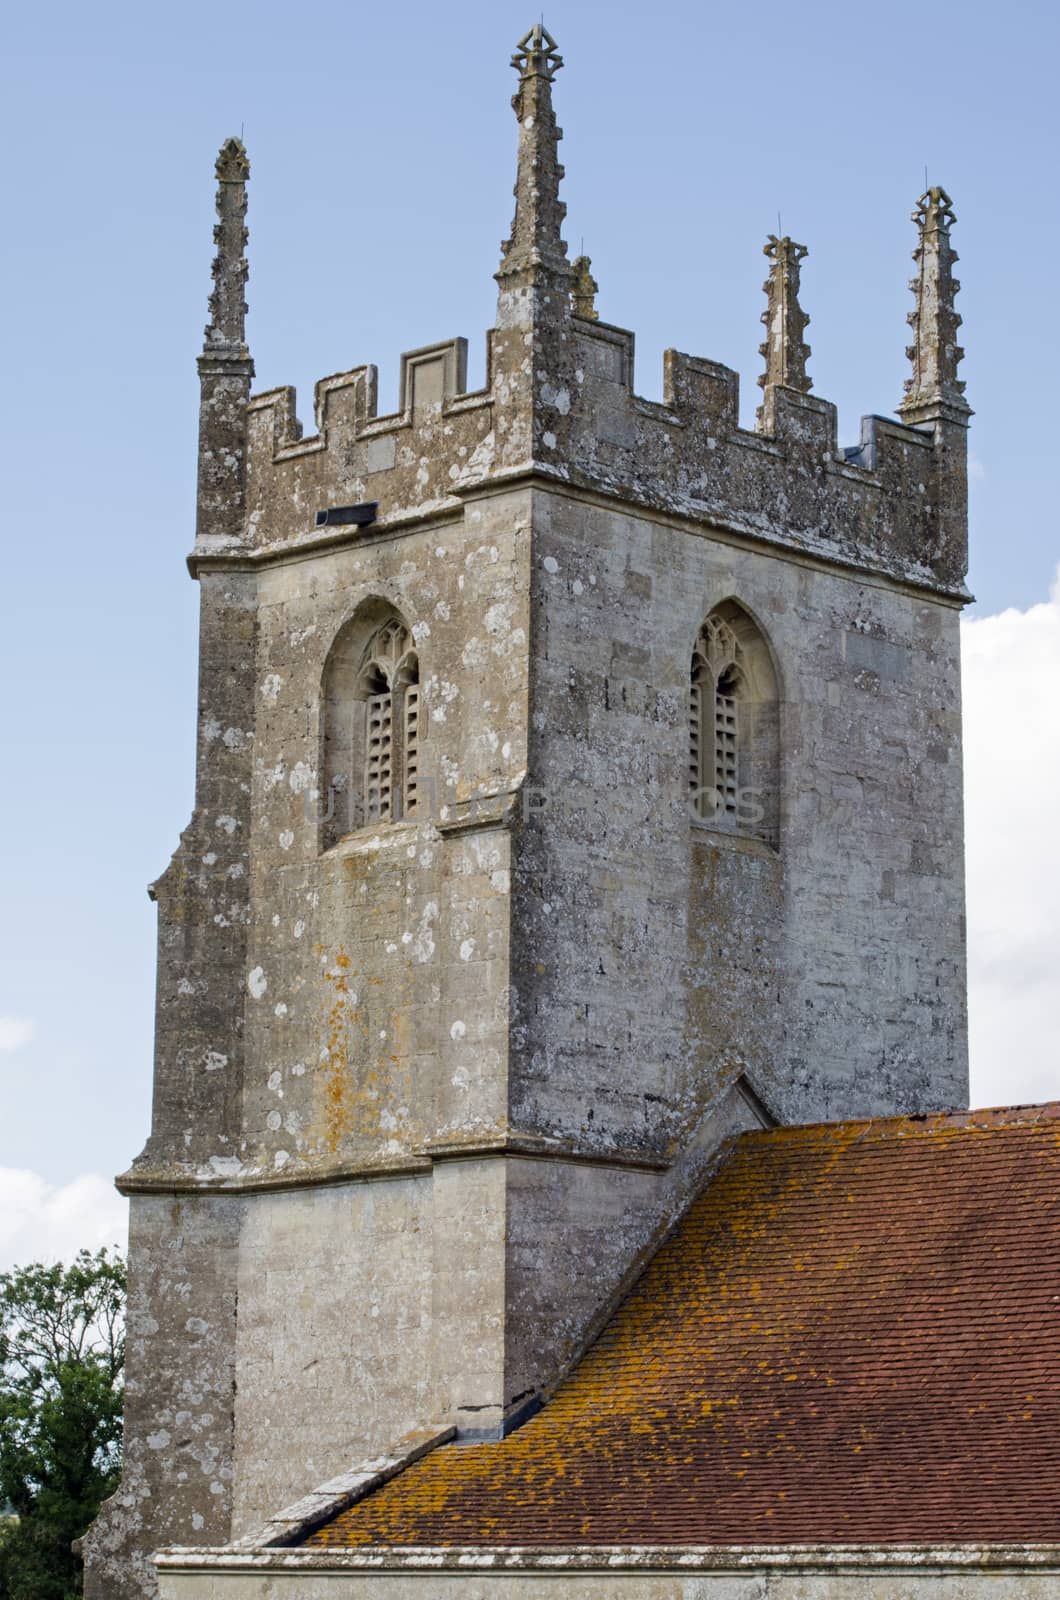 St Giles Church Tower, Imber, Wiltshire by BasPhoto